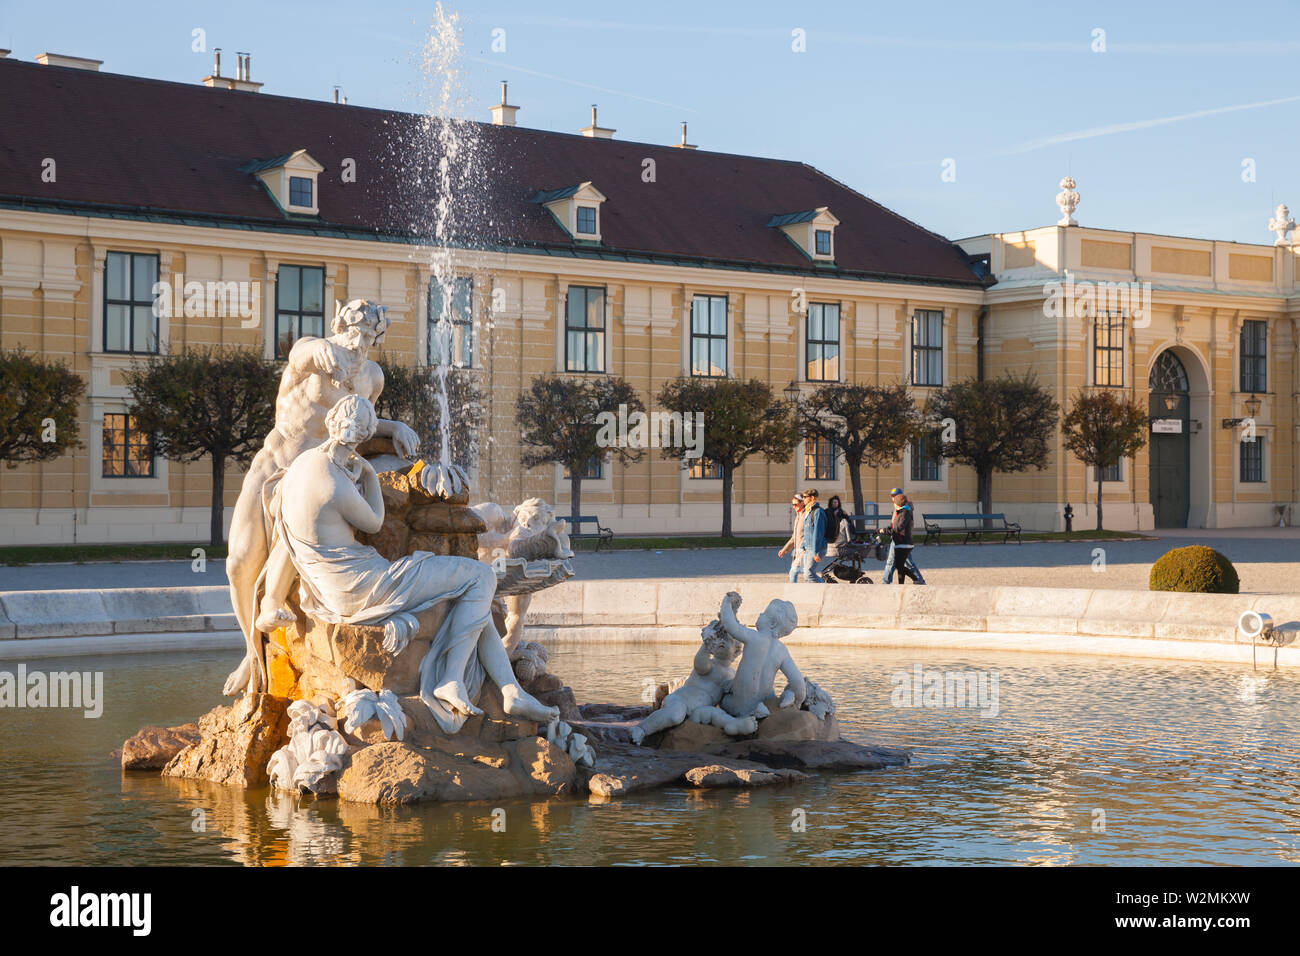 Vienna, Austria - November 1, 2015: Fountain at the entrance of the Schonbrunn Palace. It is a former imperial summer residence of successive Habsburg Stock Photo